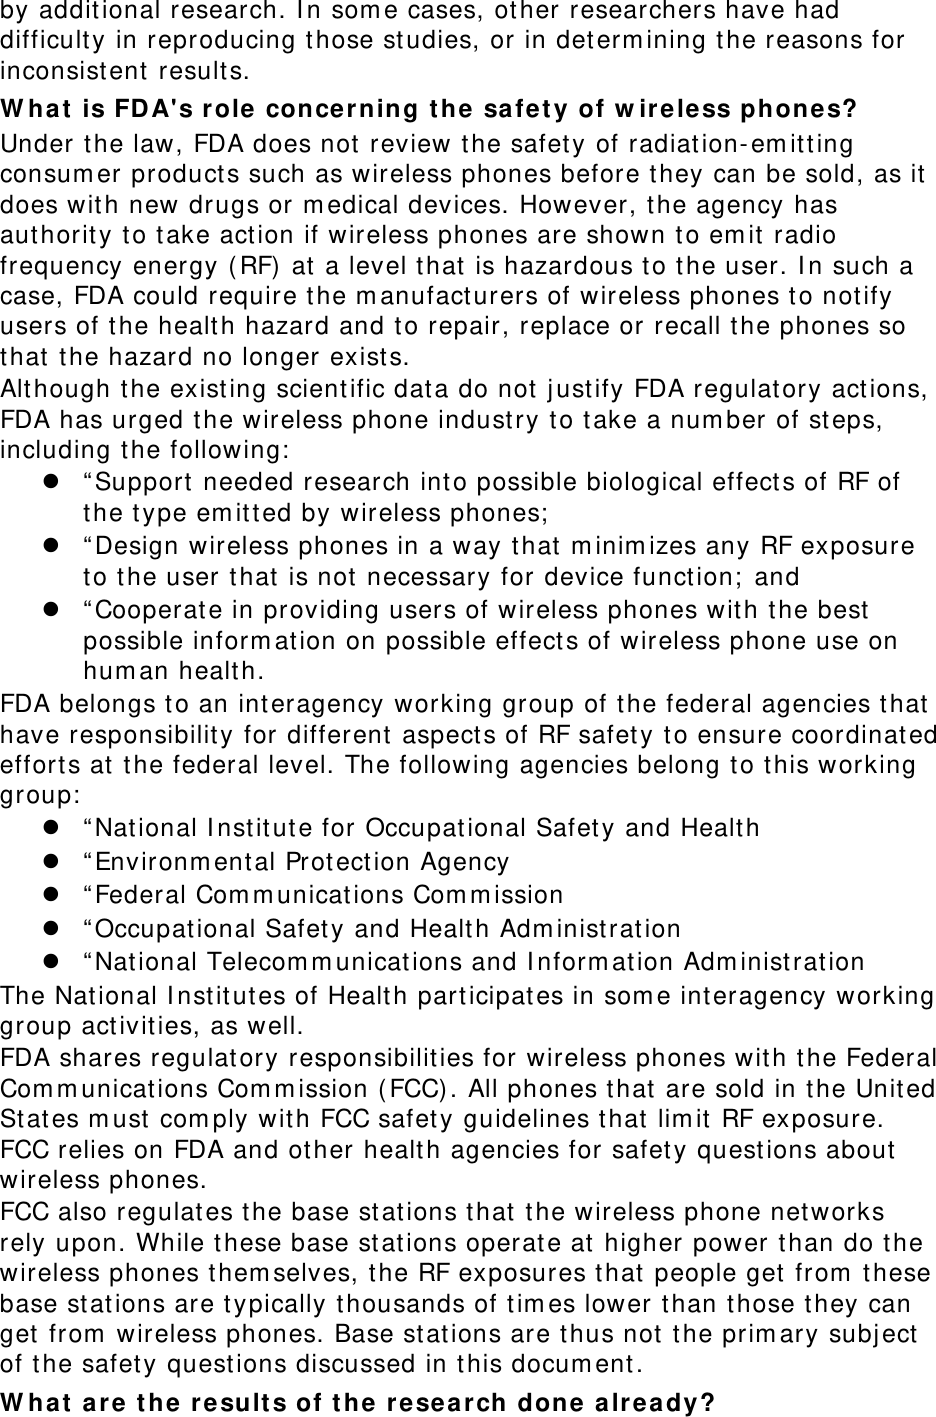 by addit ional research. I n som e cases, ot her researchers have had difficult y in reproducing t hose studies, or in det erm ining t he reasons for inconsist ent results. W h a t  is FDA&apos;s r ole  concer ning t he safety of w ir ele ss phones? Under t he law, FDA does not  review t he safet y of radiation- em itt ing consum er product s such as wireless phones before they can be sold, as it  does wit h new drugs or m edical devices. However, t he agency has aut horit y t o t ake act ion if wireless phones are shown to em it  radio frequency energy ( RF)  at  a level t hat  is hazardous t o t he user. I n such a case, FDA could require t he m anufacturers of wireless phones t o not ify users of t he healt h hazard and t o repair, replace or recall the phones so that  t he hazard no longer exist s. Although t he existing scient ific dat a do not  j ust ify FDA regulat ory act ions, FDA has urged t he wireless phone indust ry to take a num ber of st eps, including t he following:   “ Support needed research into possible biological effect s of RF of the t ype em itt ed by wireless phones;   “ Design wireless phones in a way that  m inim izes any RF exposure to the user t hat  is not  necessary for device funct ion;  and  “ Cooperat e in providing users of wireless phones wit h t he best possible inform at ion on possible effect s of wireless phone use on hum an healt h. FDA belongs t o an interagency working group of the federal agencies t hat  have responsibilit y for different  aspects of RF safet y t o ensure coordinat ed effort s at  the federal level. The following agencies belong to t his working group:   “ Nat ional I nst itute for Occupat ional Safety and Healt h  “ Environm ent al Protection Agency  “ Federal Com m unicat ions Com m ission  “ Occupat ional Safety and Healt h Adm inist rat ion  “ Nat ional Telecom m unicat ions and I nform at ion Adm inist rat ion The Nat ional I nst it utes of Healt h part icipates in som e interagency working group act ivit ies, as well. FDA shares regulat ory responsibilit ies for wireless phones wit h t he Federal Com m unicat ions Com m ission ( FCC). All phones t hat  are sold in t he Unit ed St ates m ust  com ply with FCC safet y guidelines t hat  lim it  RF exposure. FCC relies on FDA and ot her healt h agencies for safet y questions about  wireless phones. FCC also regulat es t he base st at ions t hat  the wireless phone networks rely upon. While t hese base st ations operate at  higher power t han do t he wireless phones t hem selves, t he RF exposures t hat  people get from  t hese base st ations are t ypically t housands of t im es lower t han those t hey can get  from  wireless phones. Base st at ions are t hus not  t he prim ary subj ect  of t he safet y quest ions discussed in t his docum ent . W h a t  a re t he r e sult s of t he  re sea r ch done a lr e a dy? 